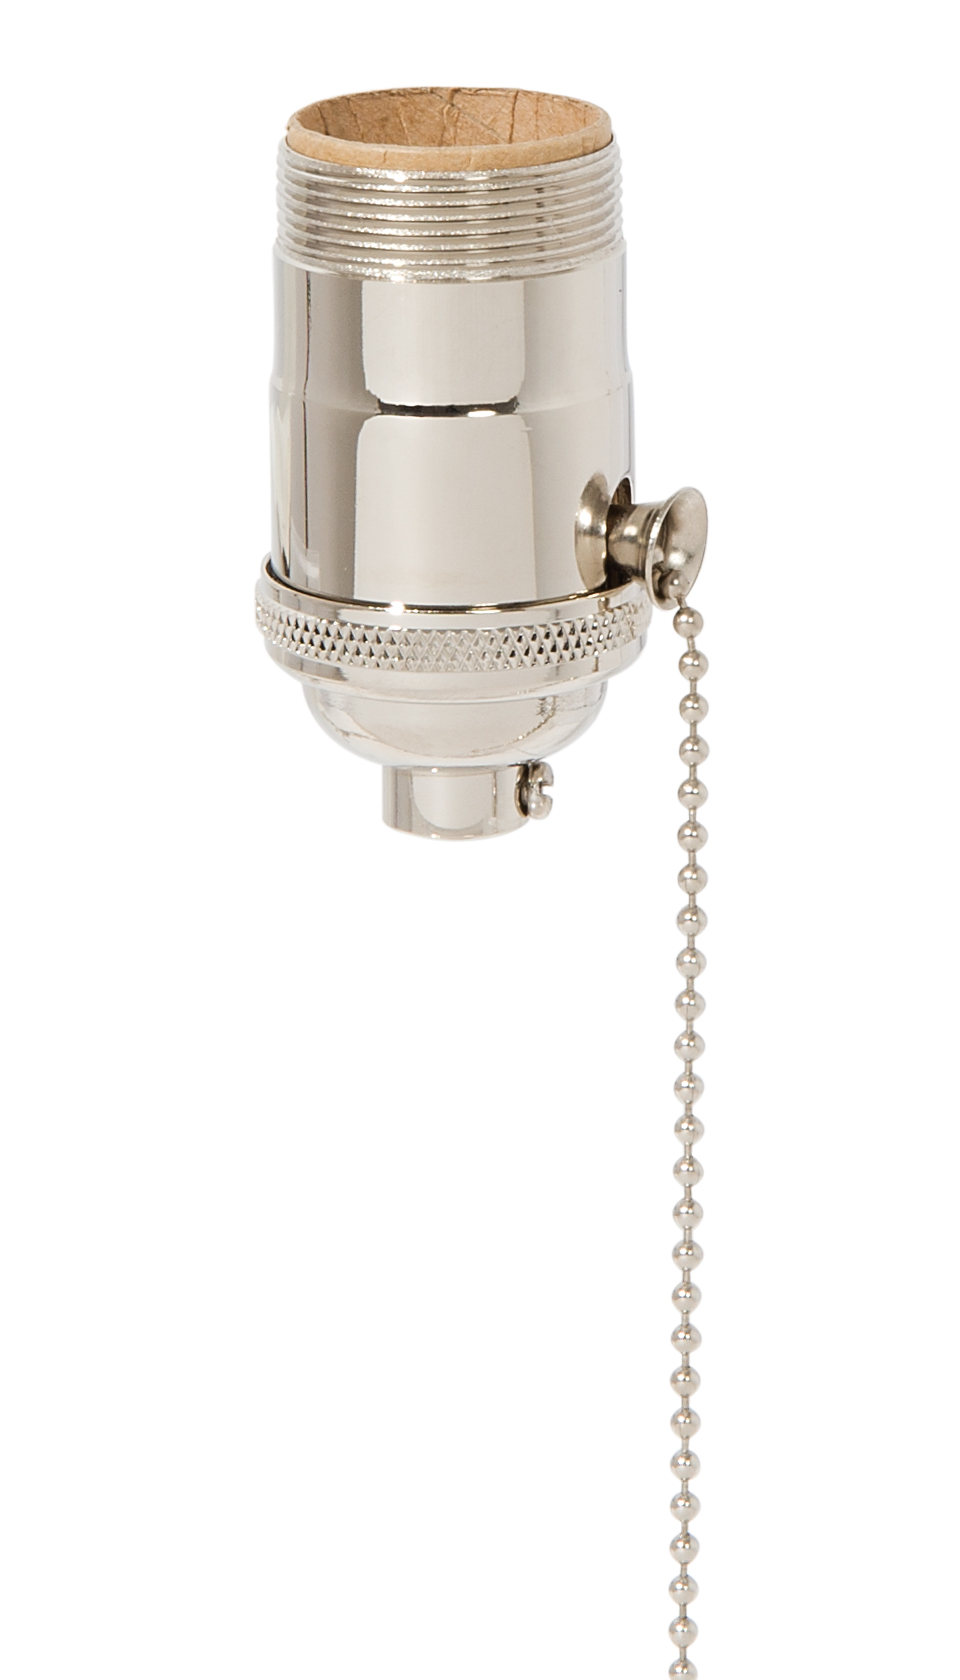 B&P Lamp® Heavy Turned Brass Socket With Nickel Plated Finish, On/Off Pull Chain Function, Uno Thread Shell - image 1 of 2